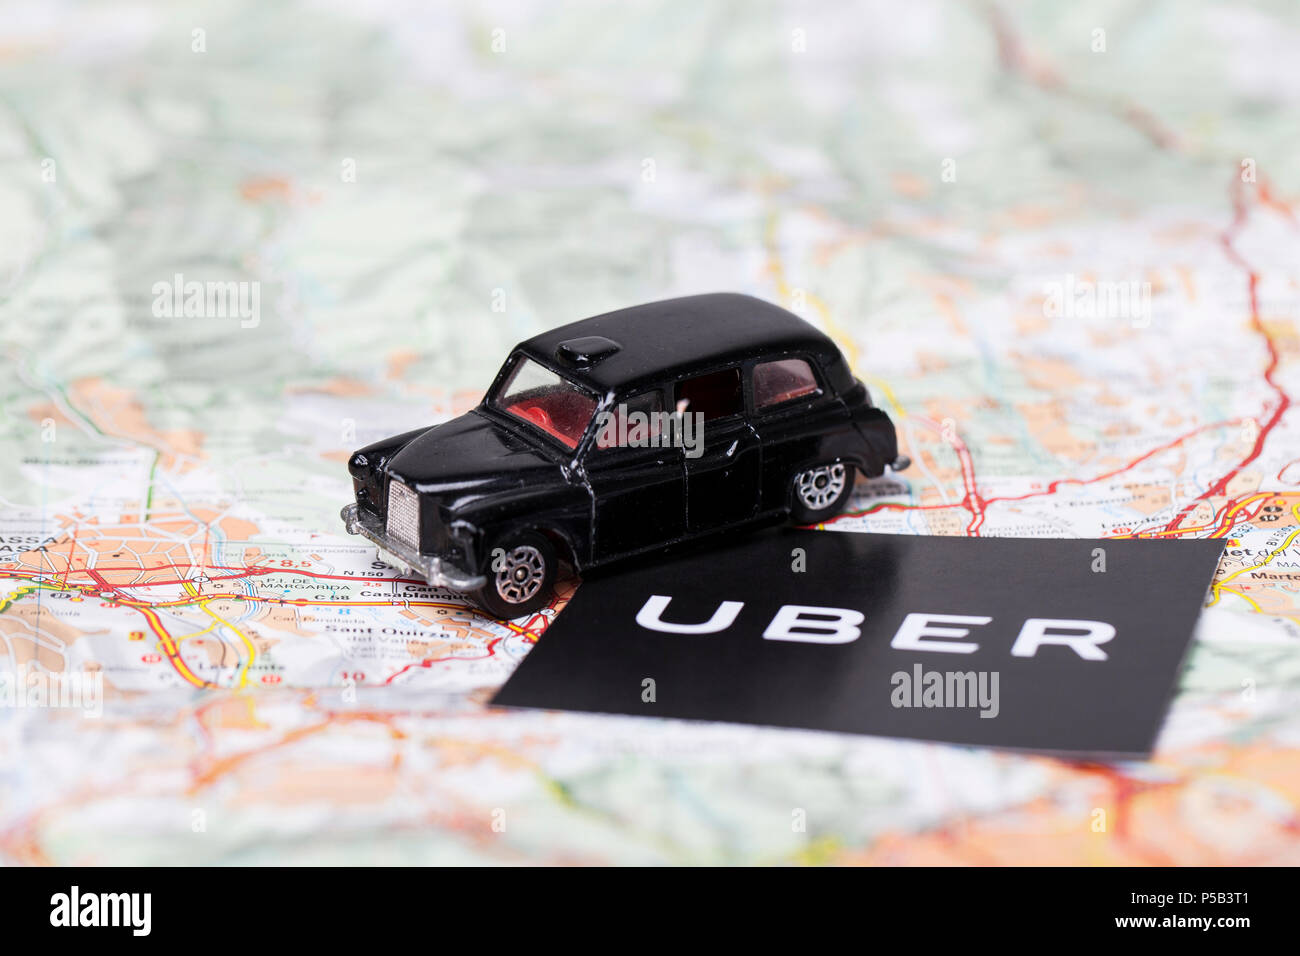 London, UK - MARCH 23rd 2017: A photograph of the Uber logo with a black London style taxi toy car. Uber is a popular taxi style transport service app Stock Photo